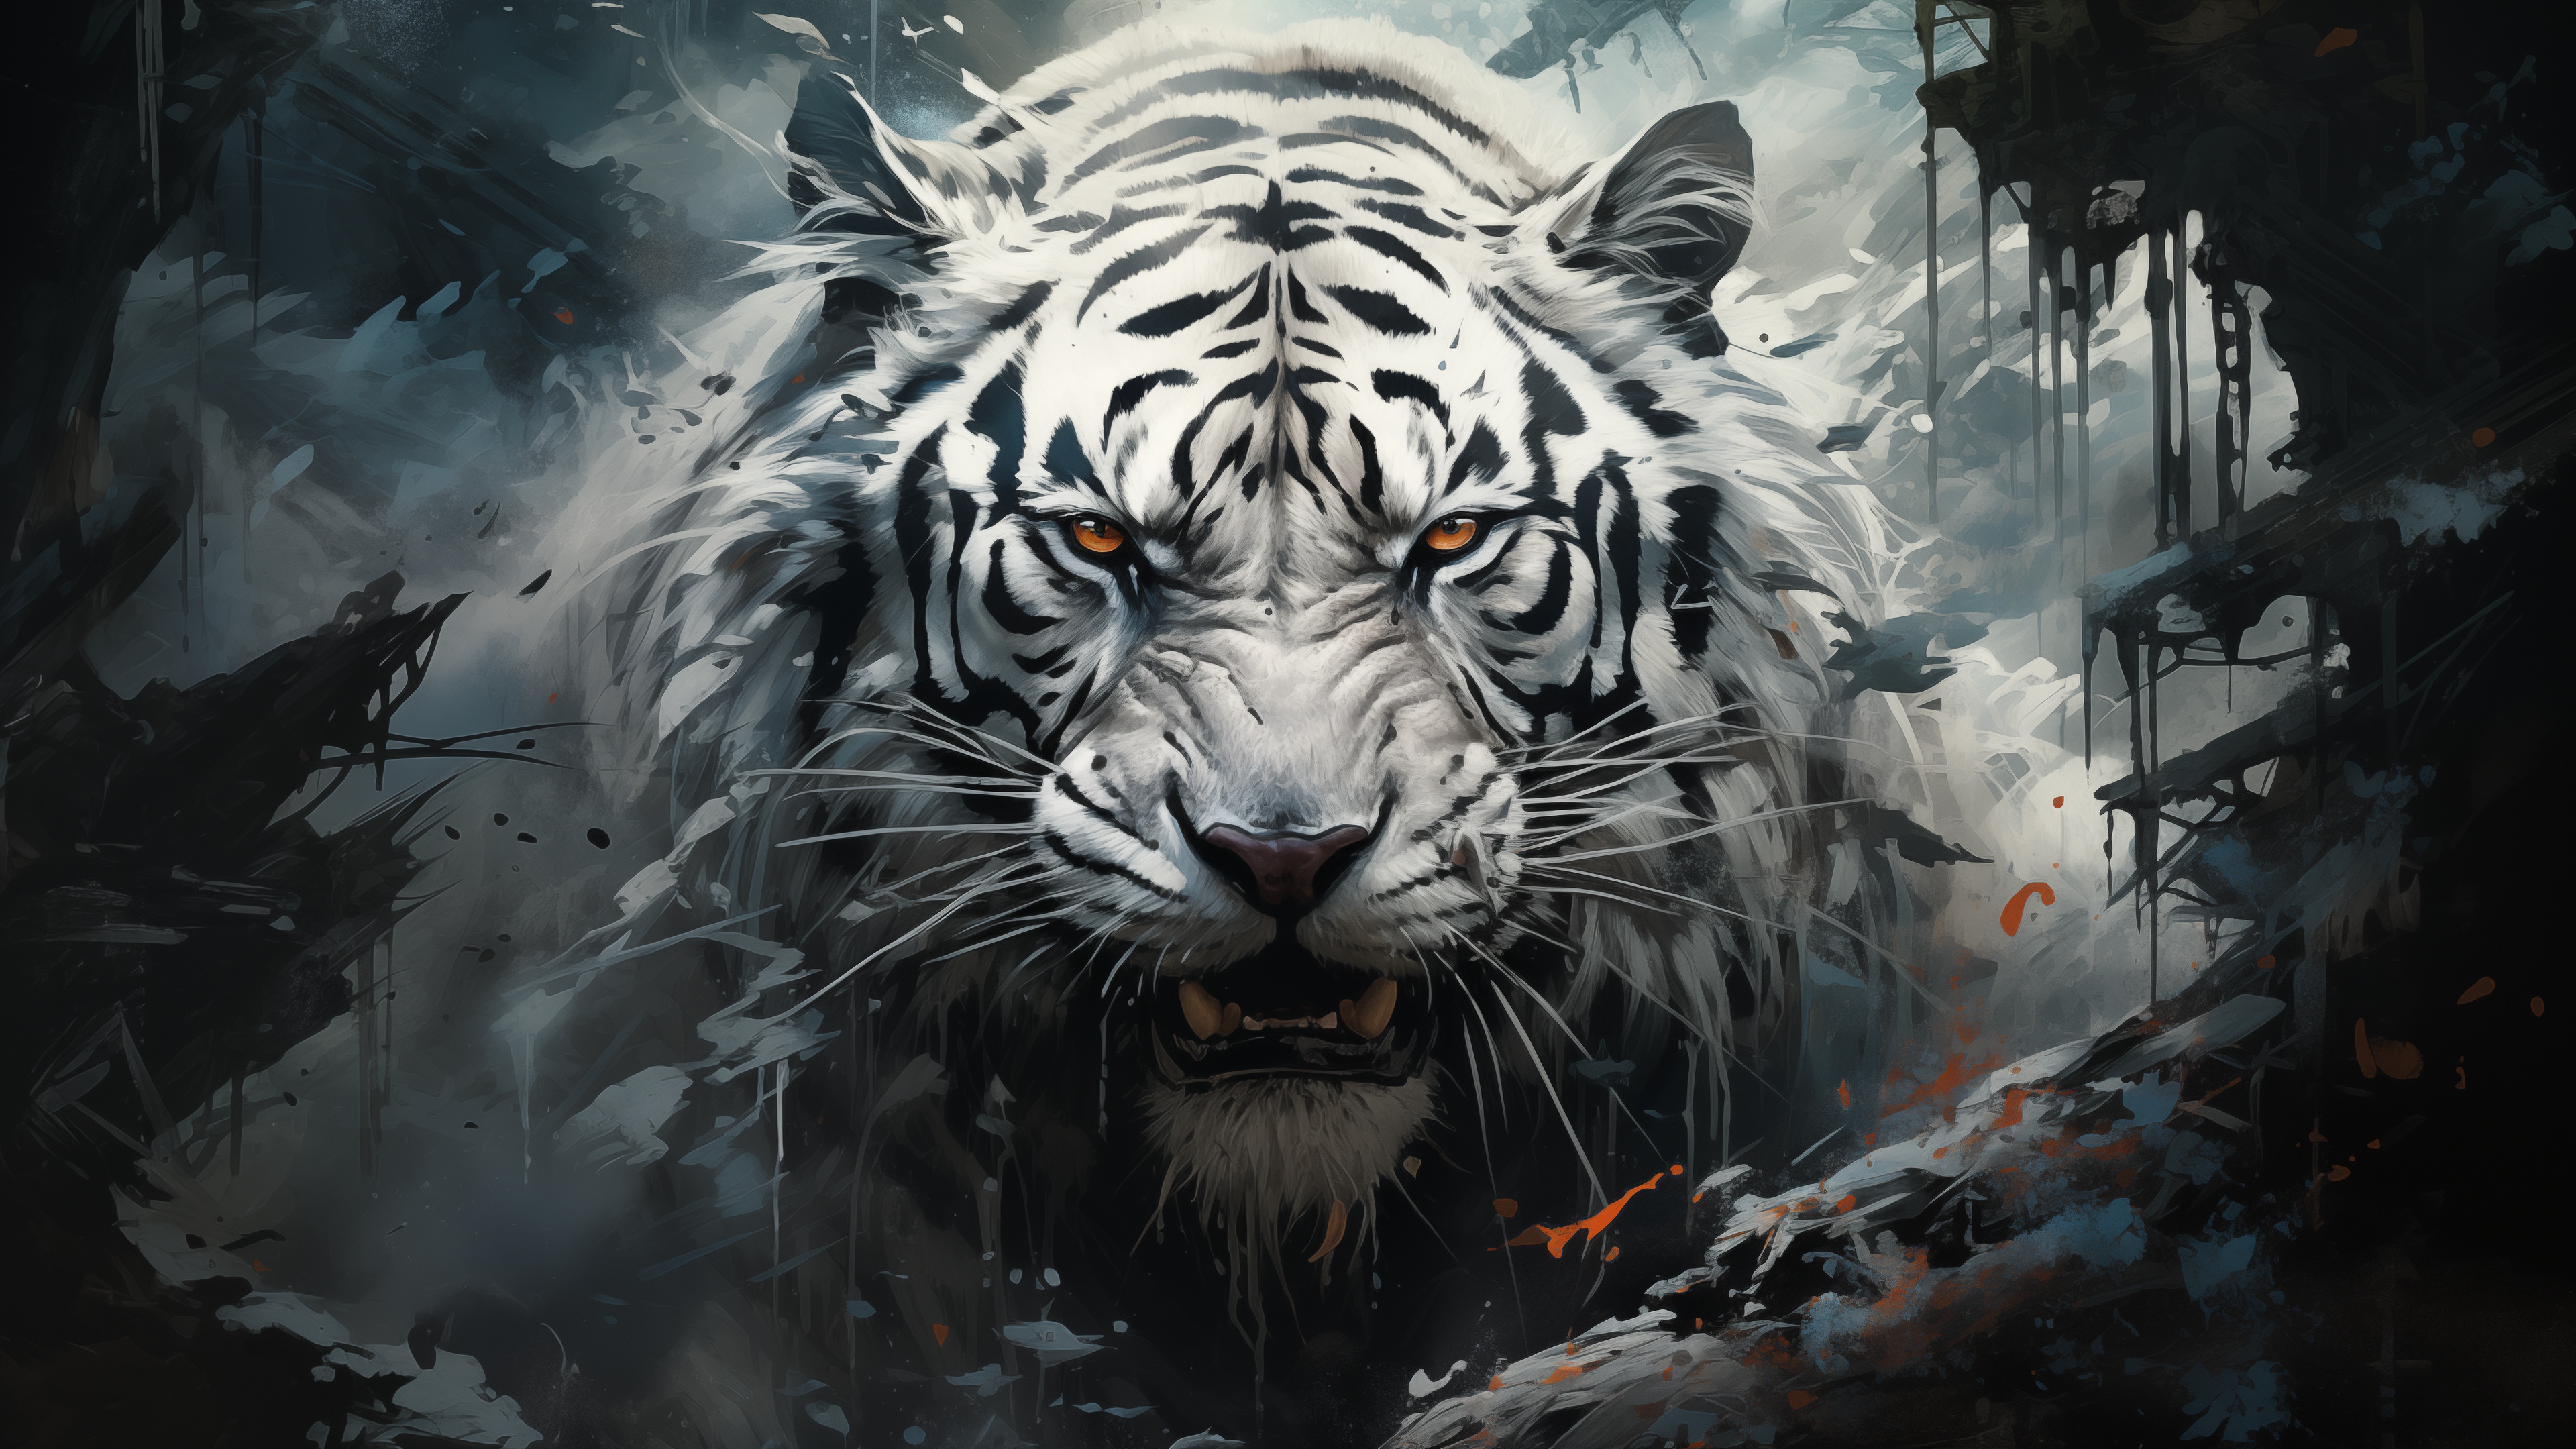 The fearsome white tiger